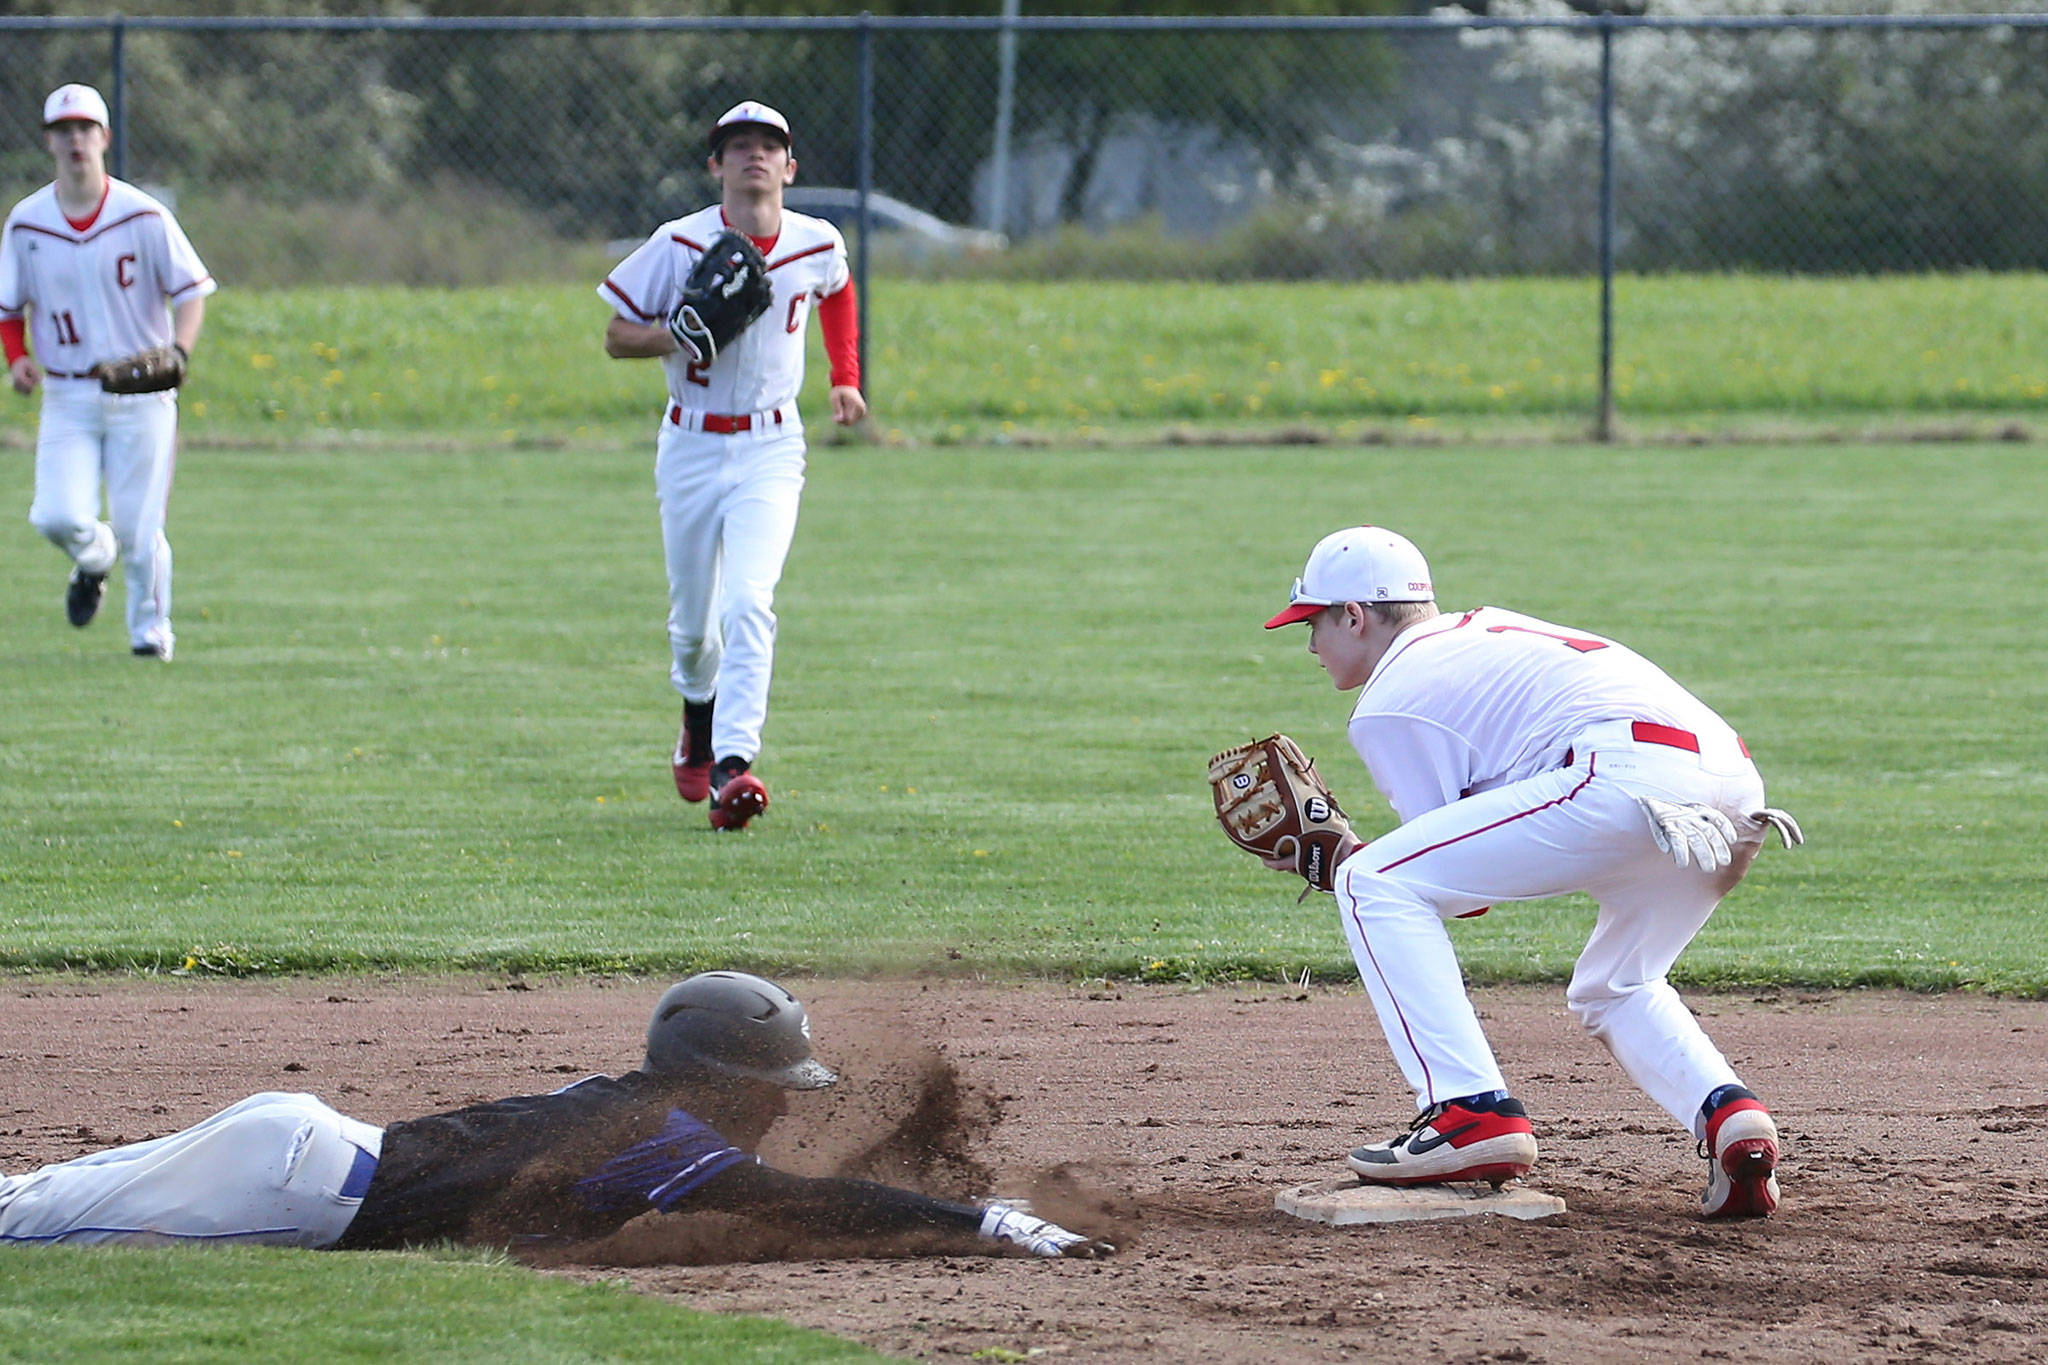 Coupeville second baseman Daniel Olson forces out a South Whidbey runner who failed to tag up on time on a fly ball. Center fielder Hawtorne Wolfe, center, made the catch and throw that doubled off the Falcon.(Photo by John Fisken)